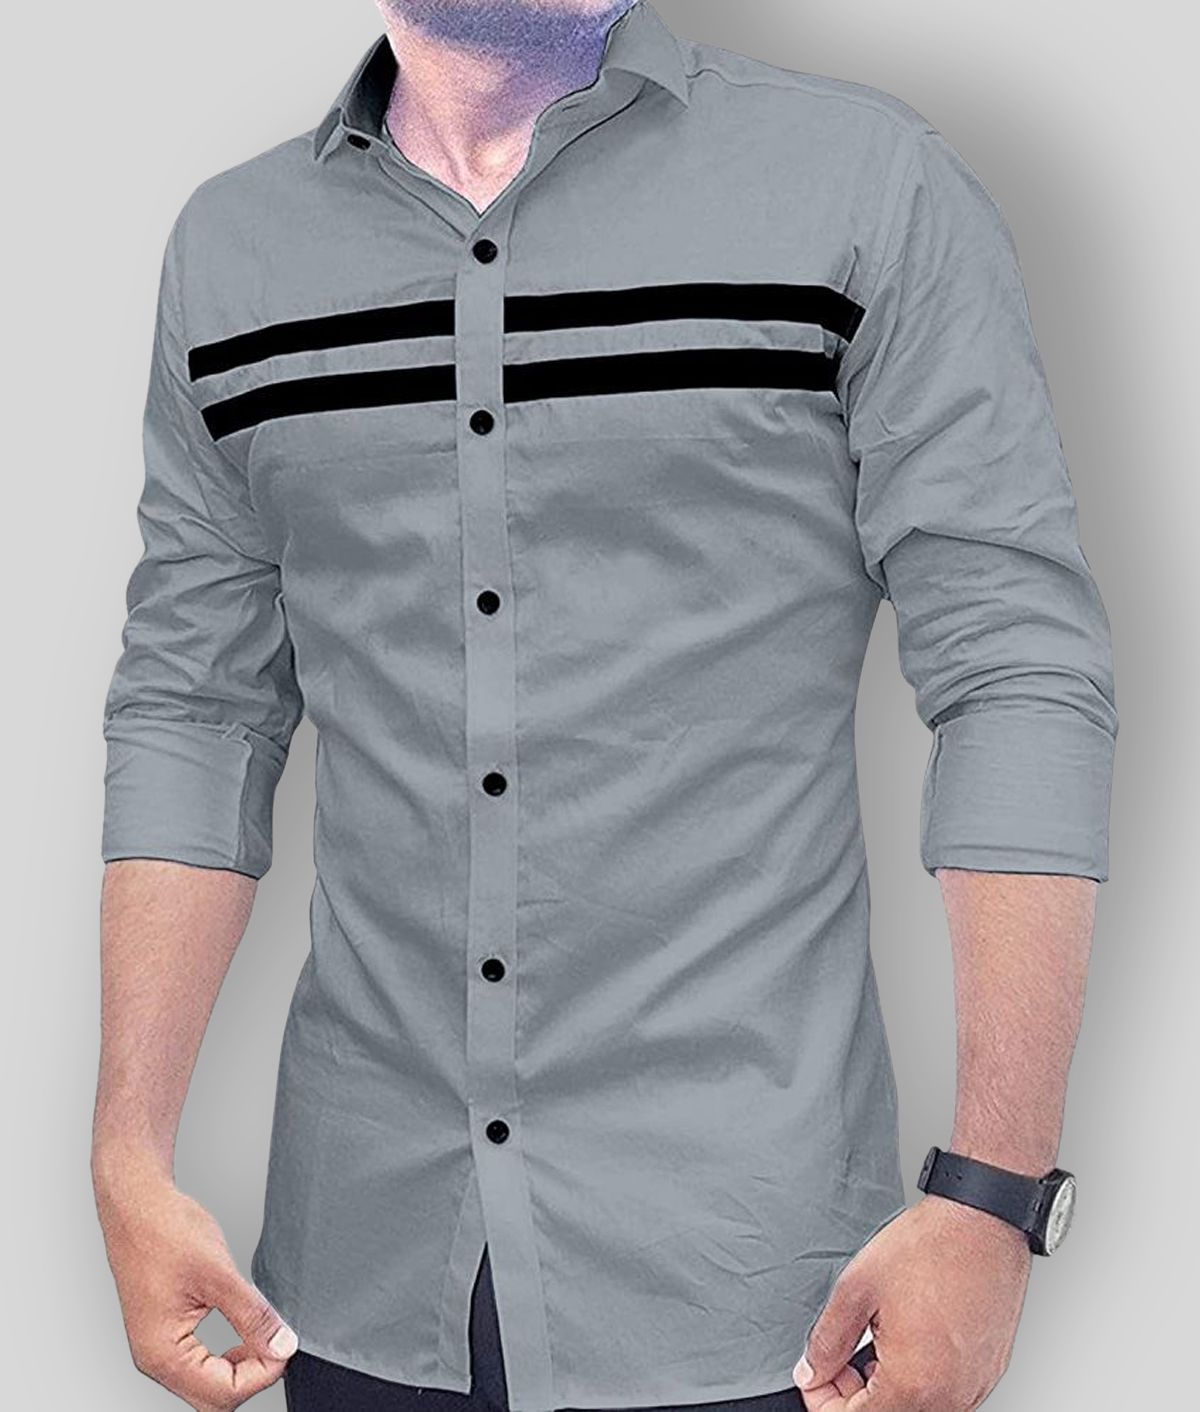     			VERTUSY Cotton Blend Regular Fit Striped Full Sleeves Men's Casual Shirt - Grey ( Pack of 1 )